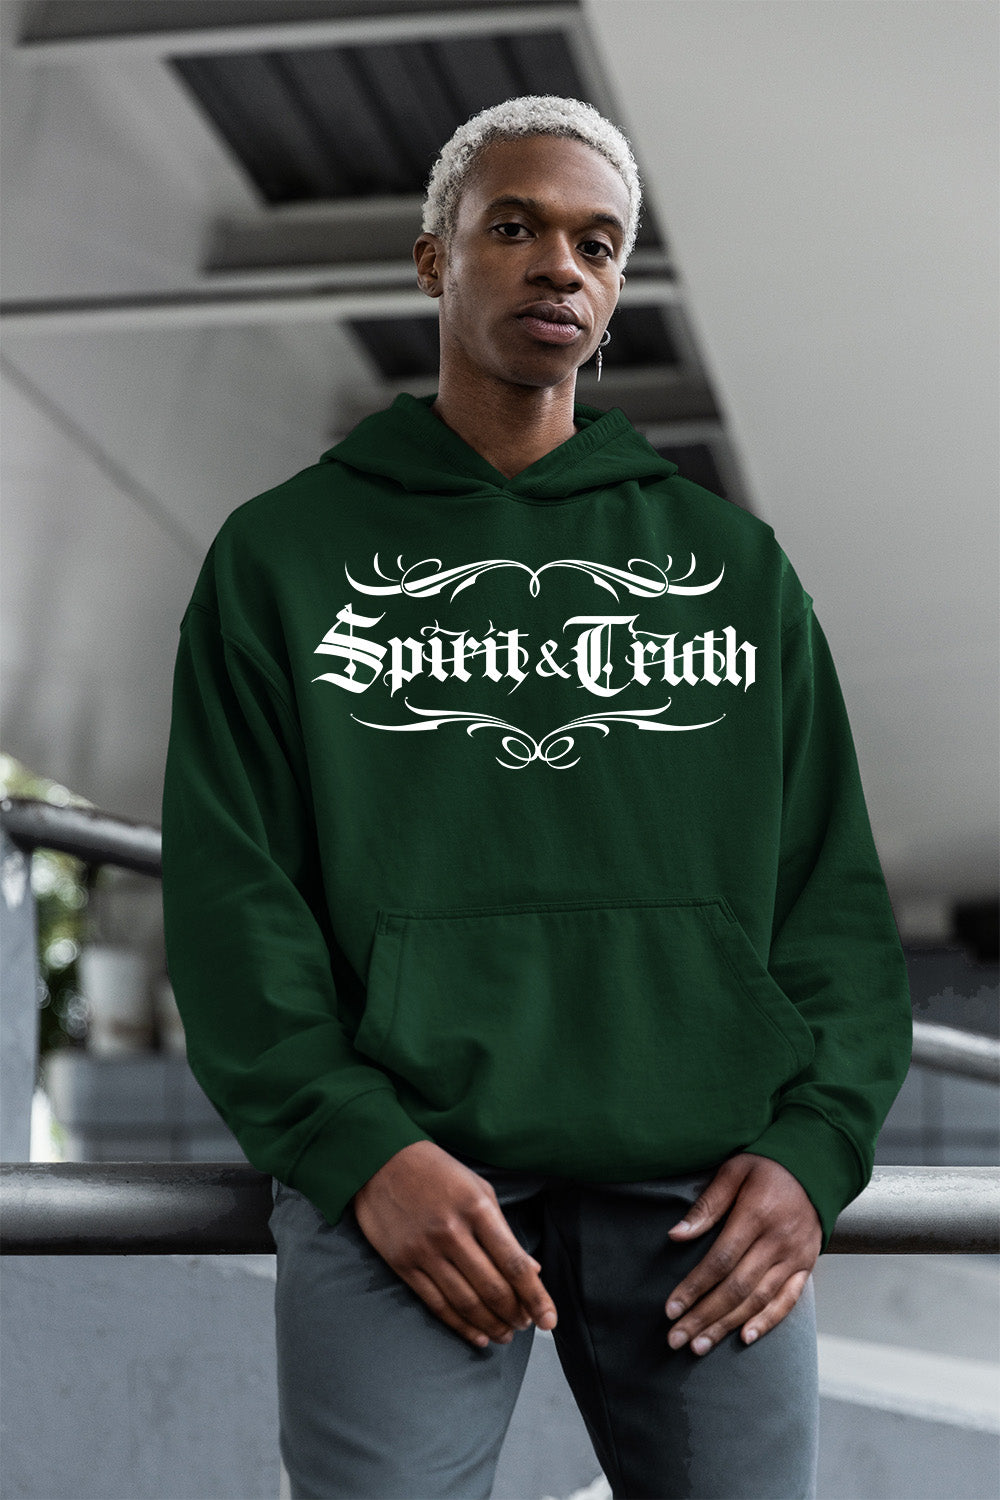 SPIRIT & TRUTH - White as Snow - Adult Hoodie